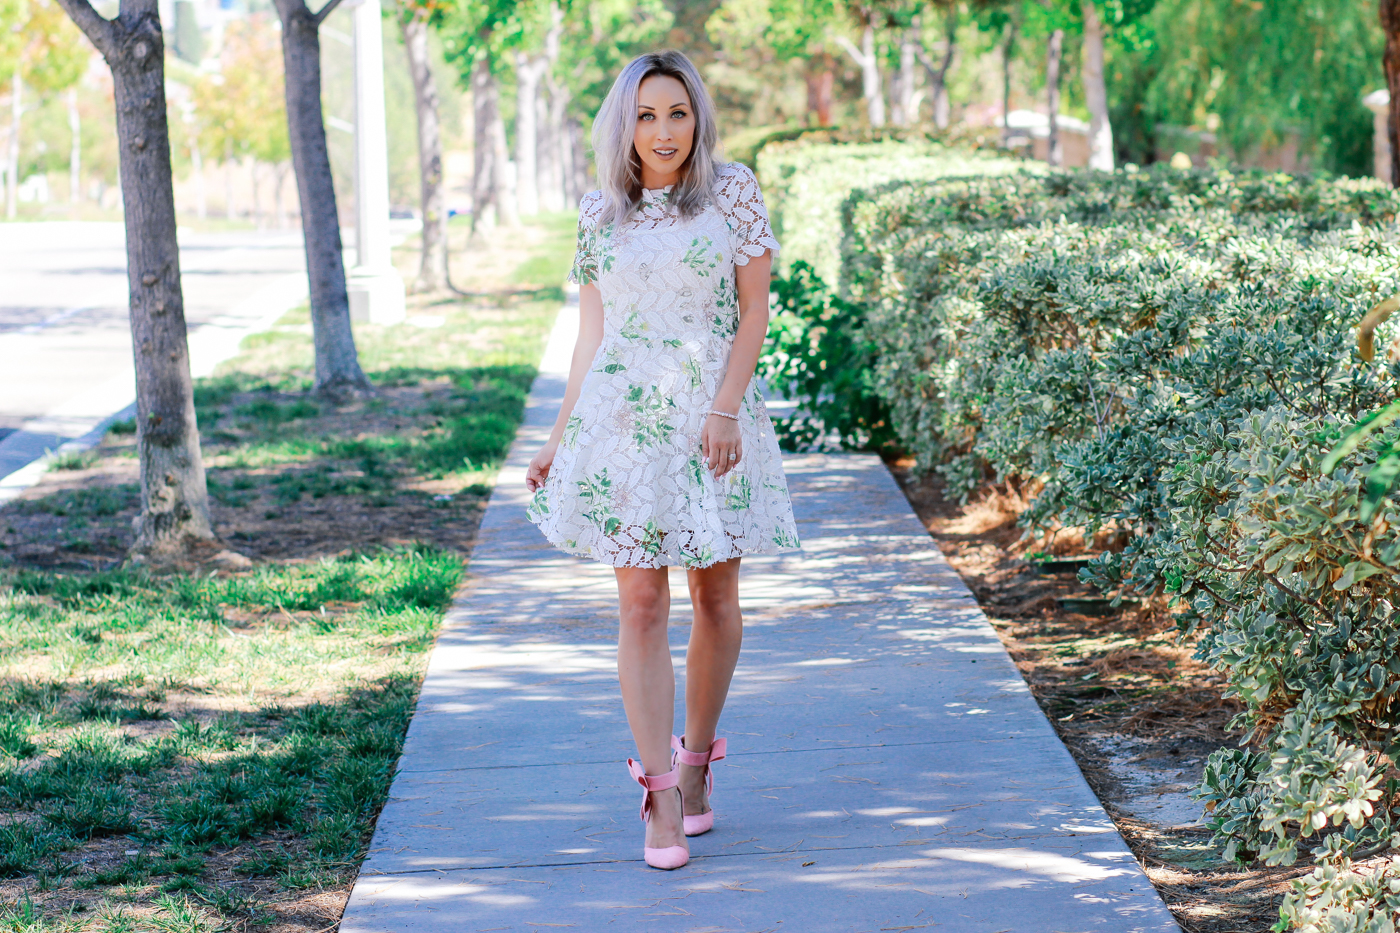 Blondie in the City | Summer Lace Dress from @chicwish | Handmade Dazzling Pastel Pink Glamour Bracelet from @Sweet-Charm-Elegance | Pink Bow Heels | Girly Street Style 